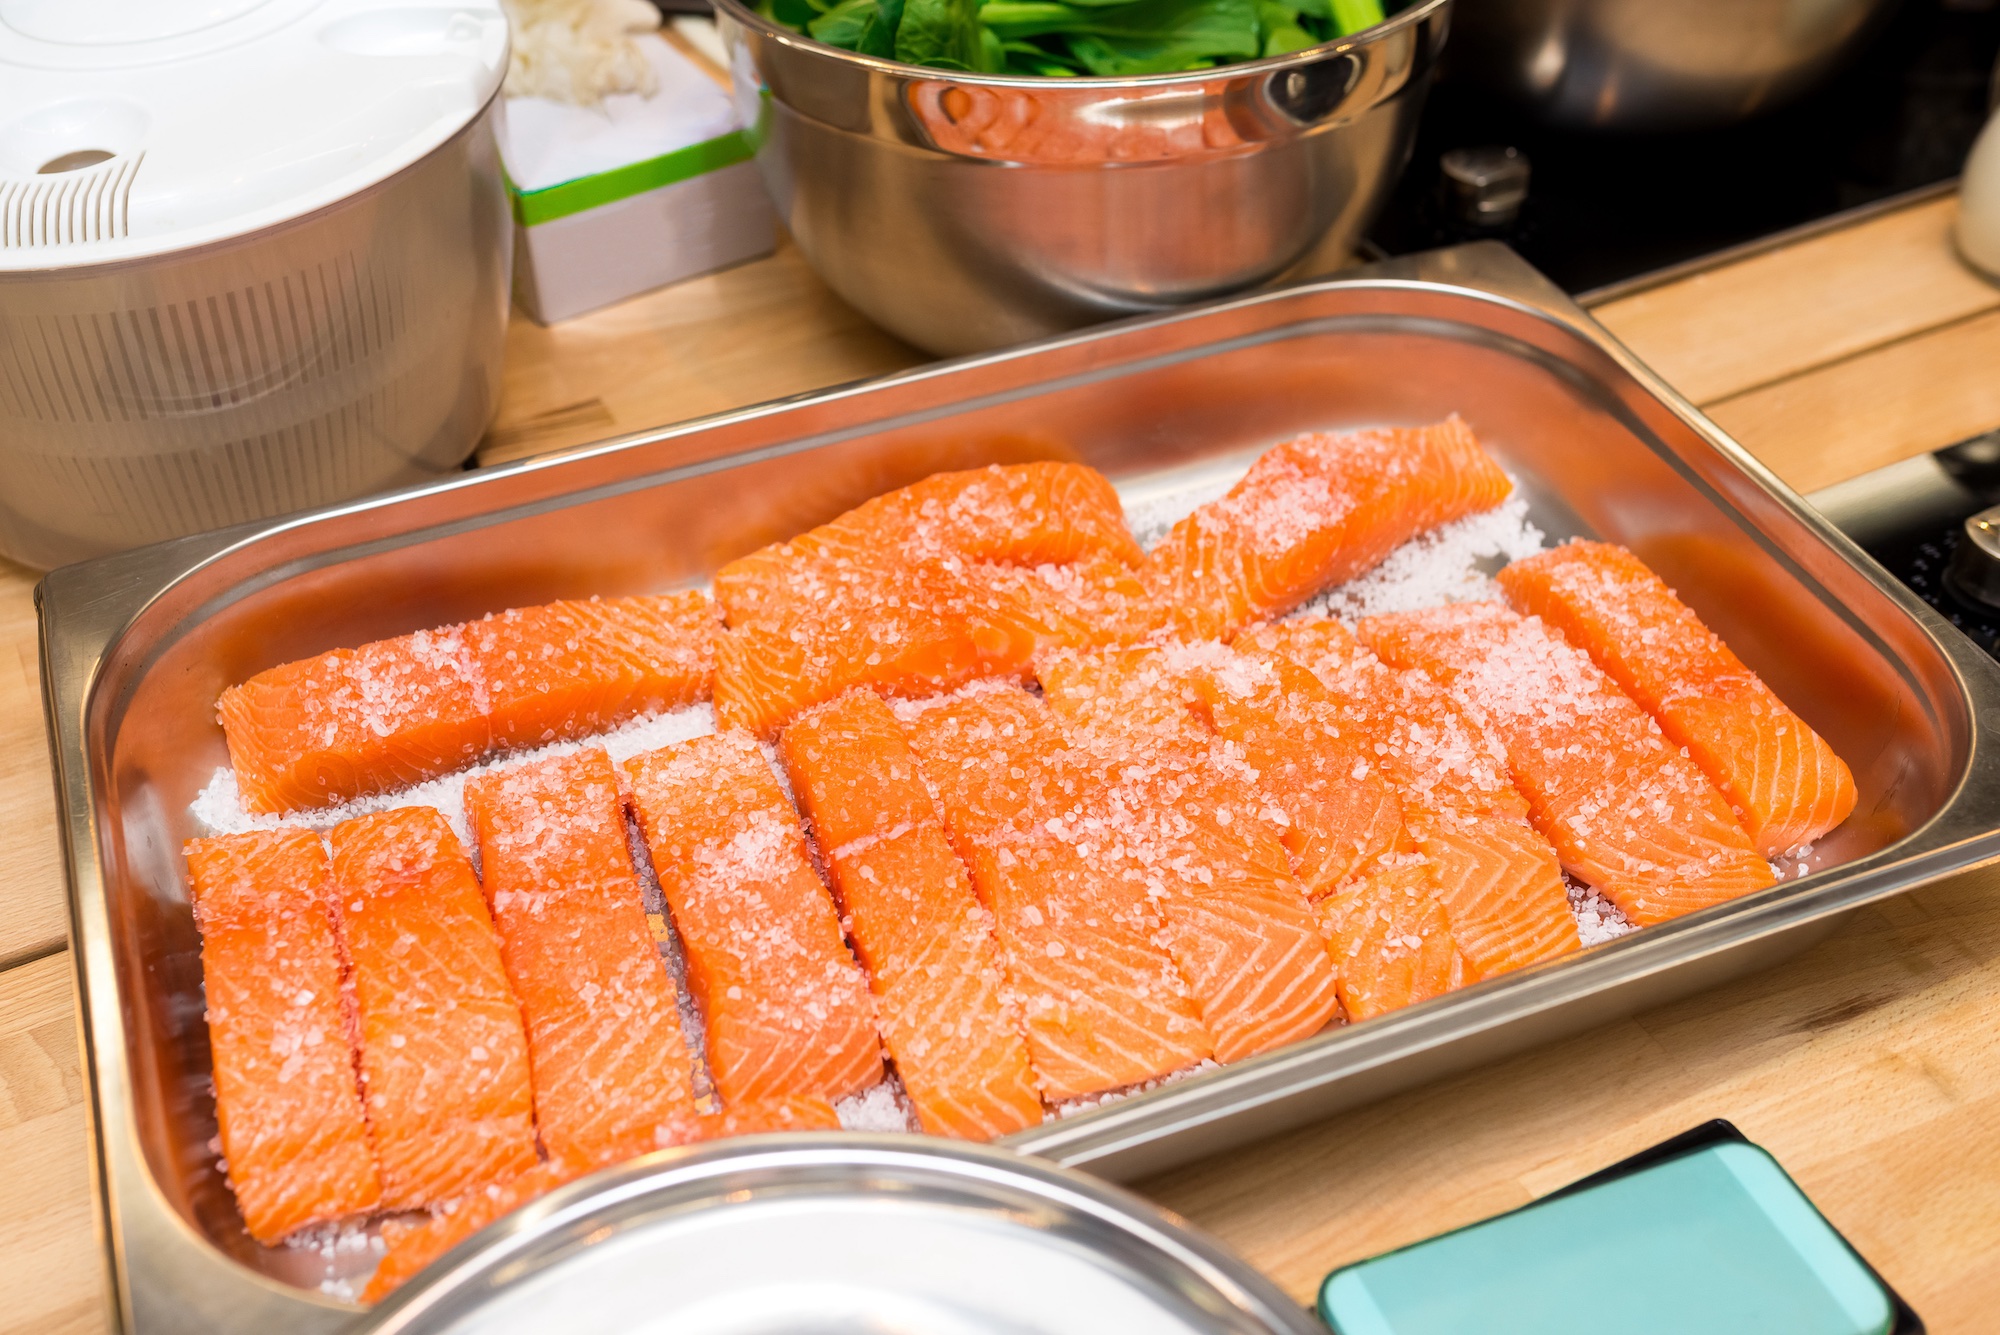 Pieces of salmon are laid out in a baking tray